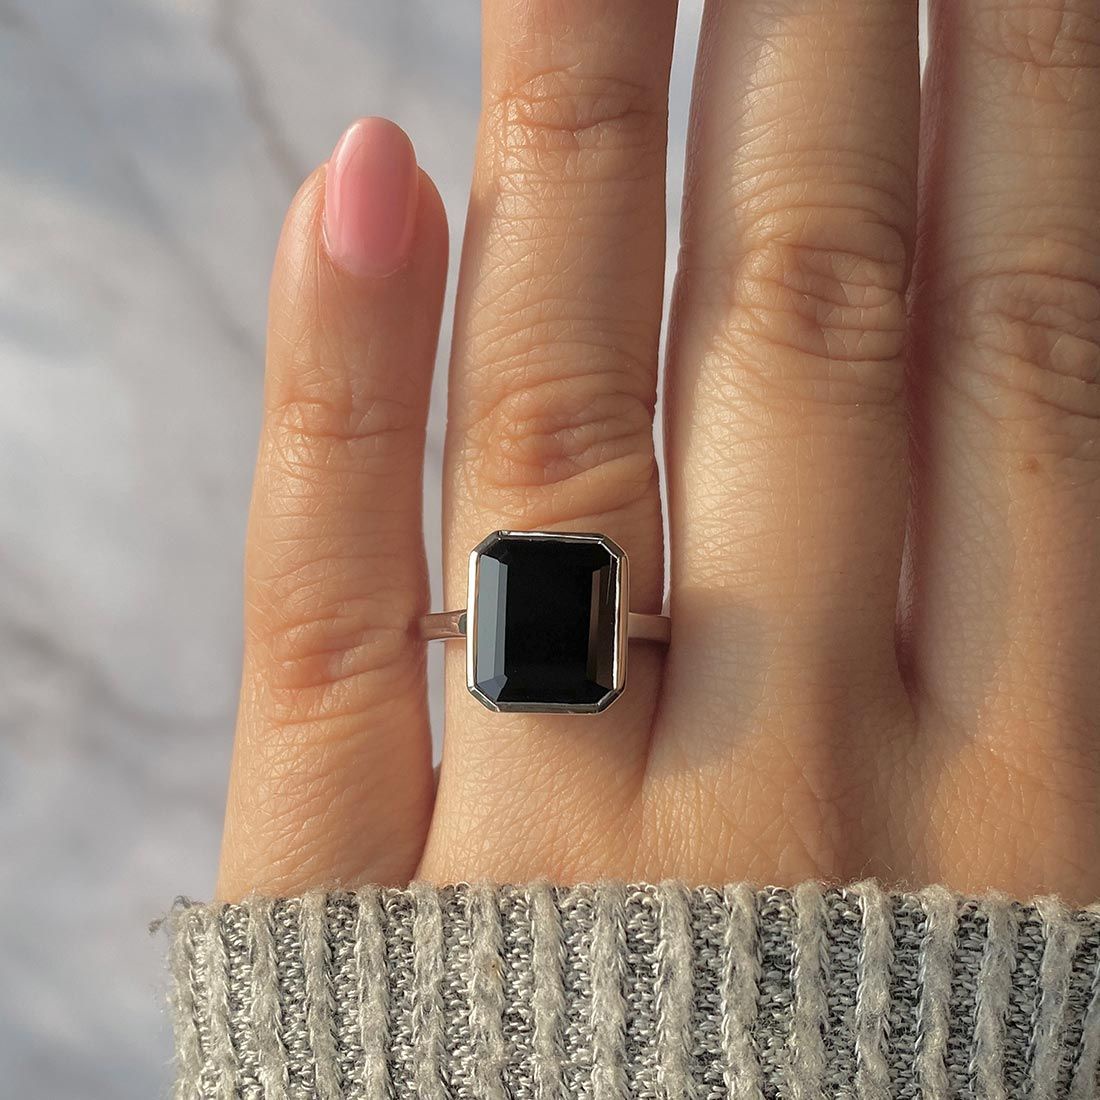 Chase your True Love with a Black Tourmaline Rings